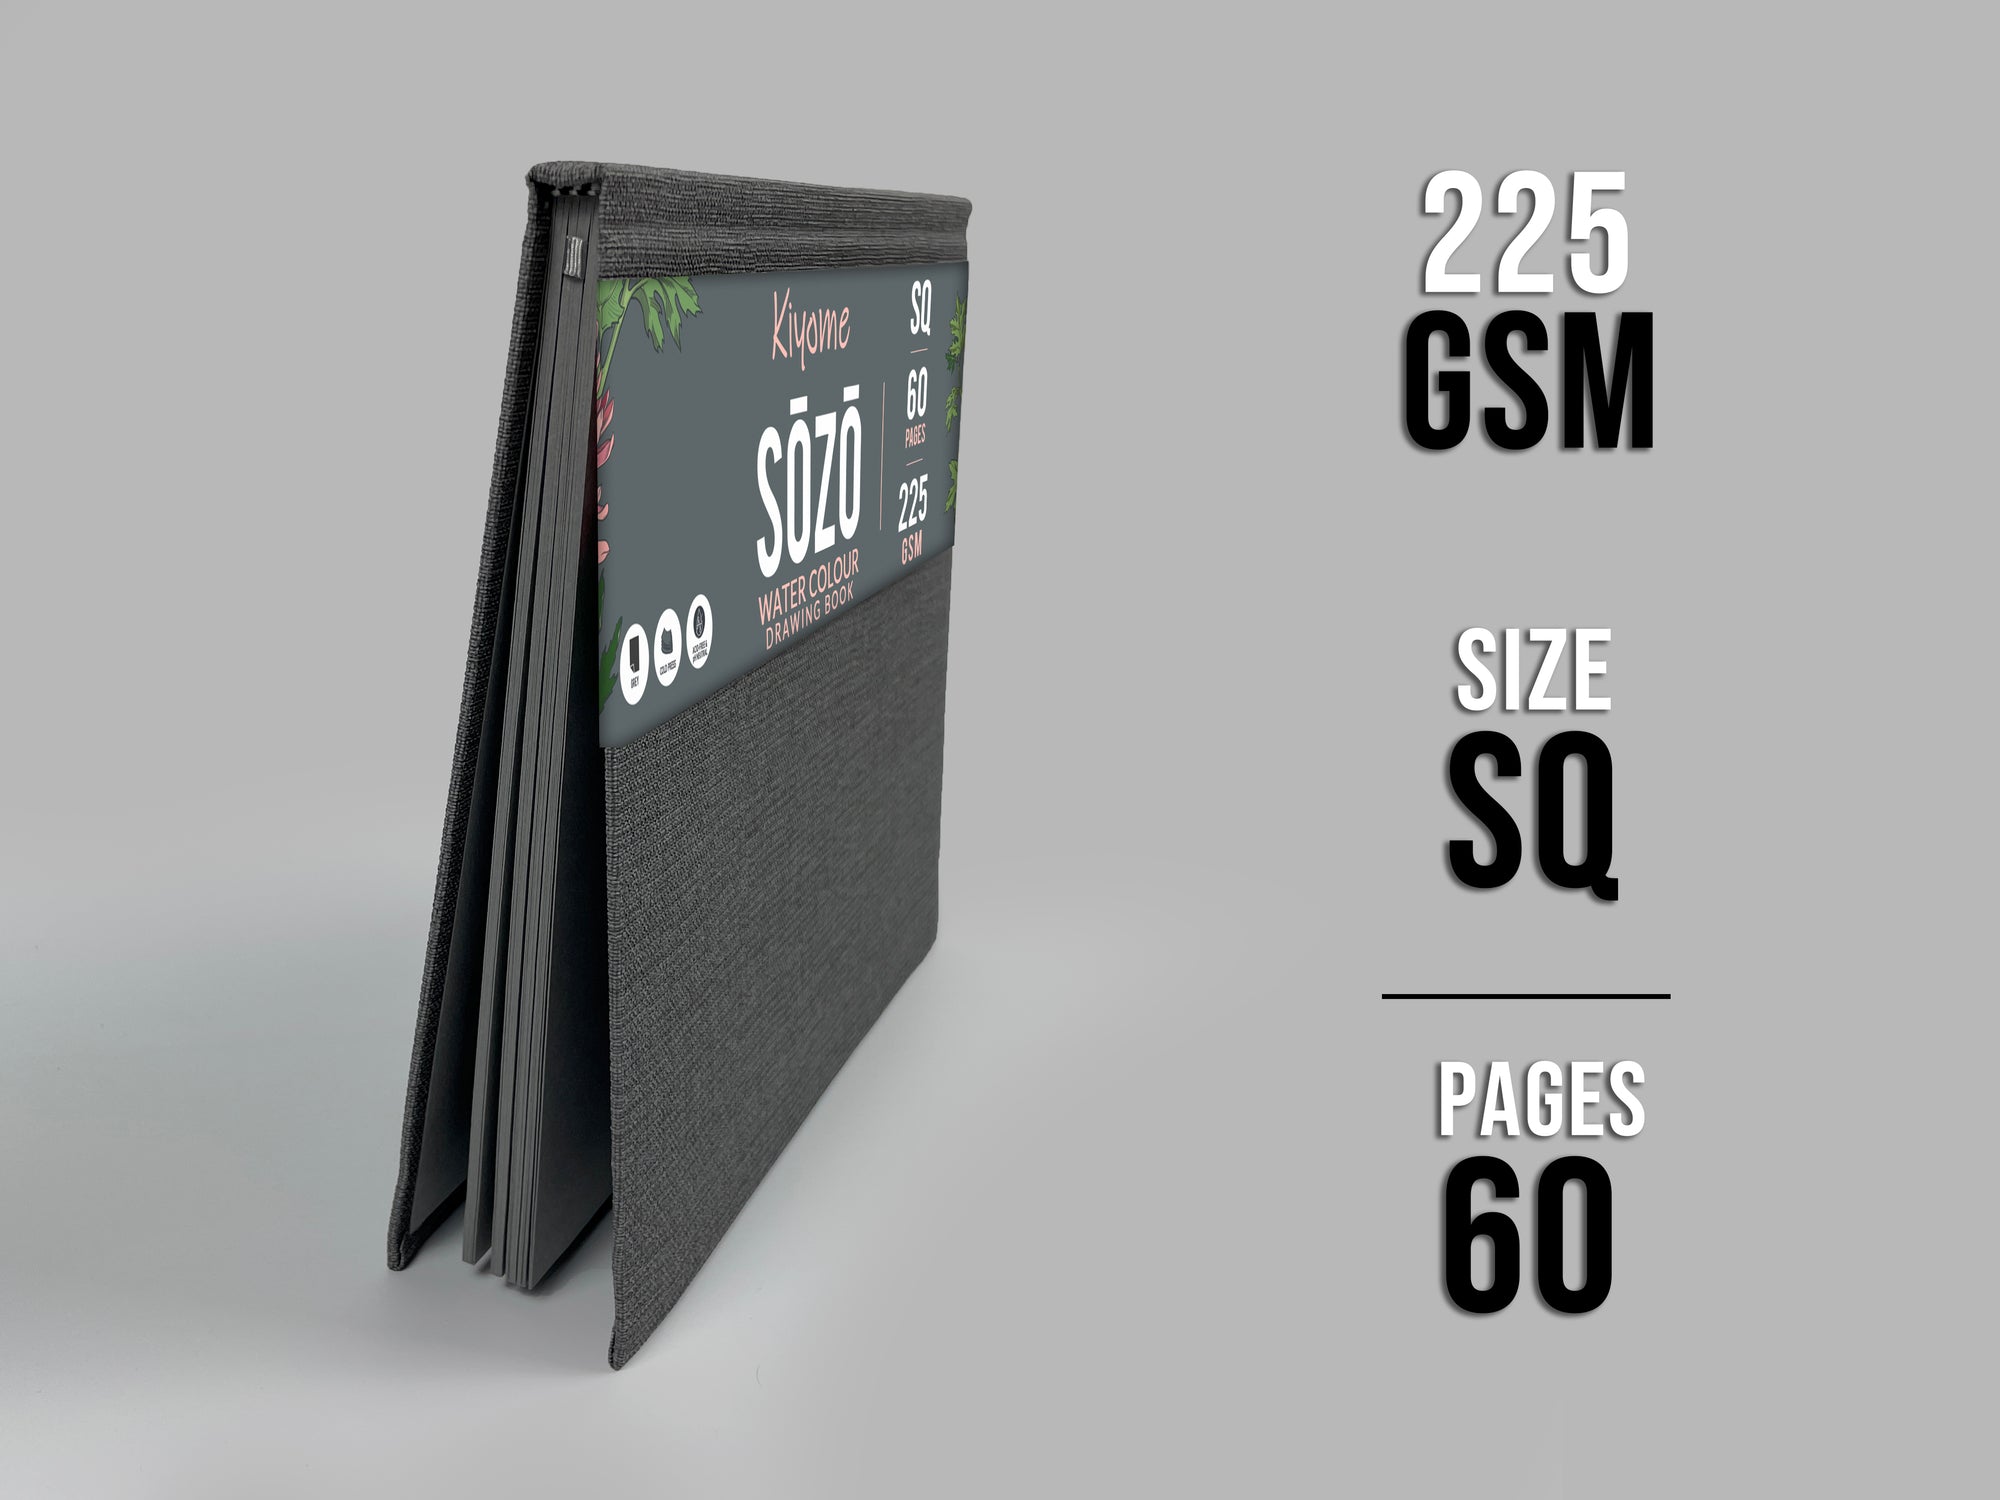 Kiyome SOZO Grey Toned Sketchbook | Canvas Textured Cover | 225 GSM | Square | 60 Pages